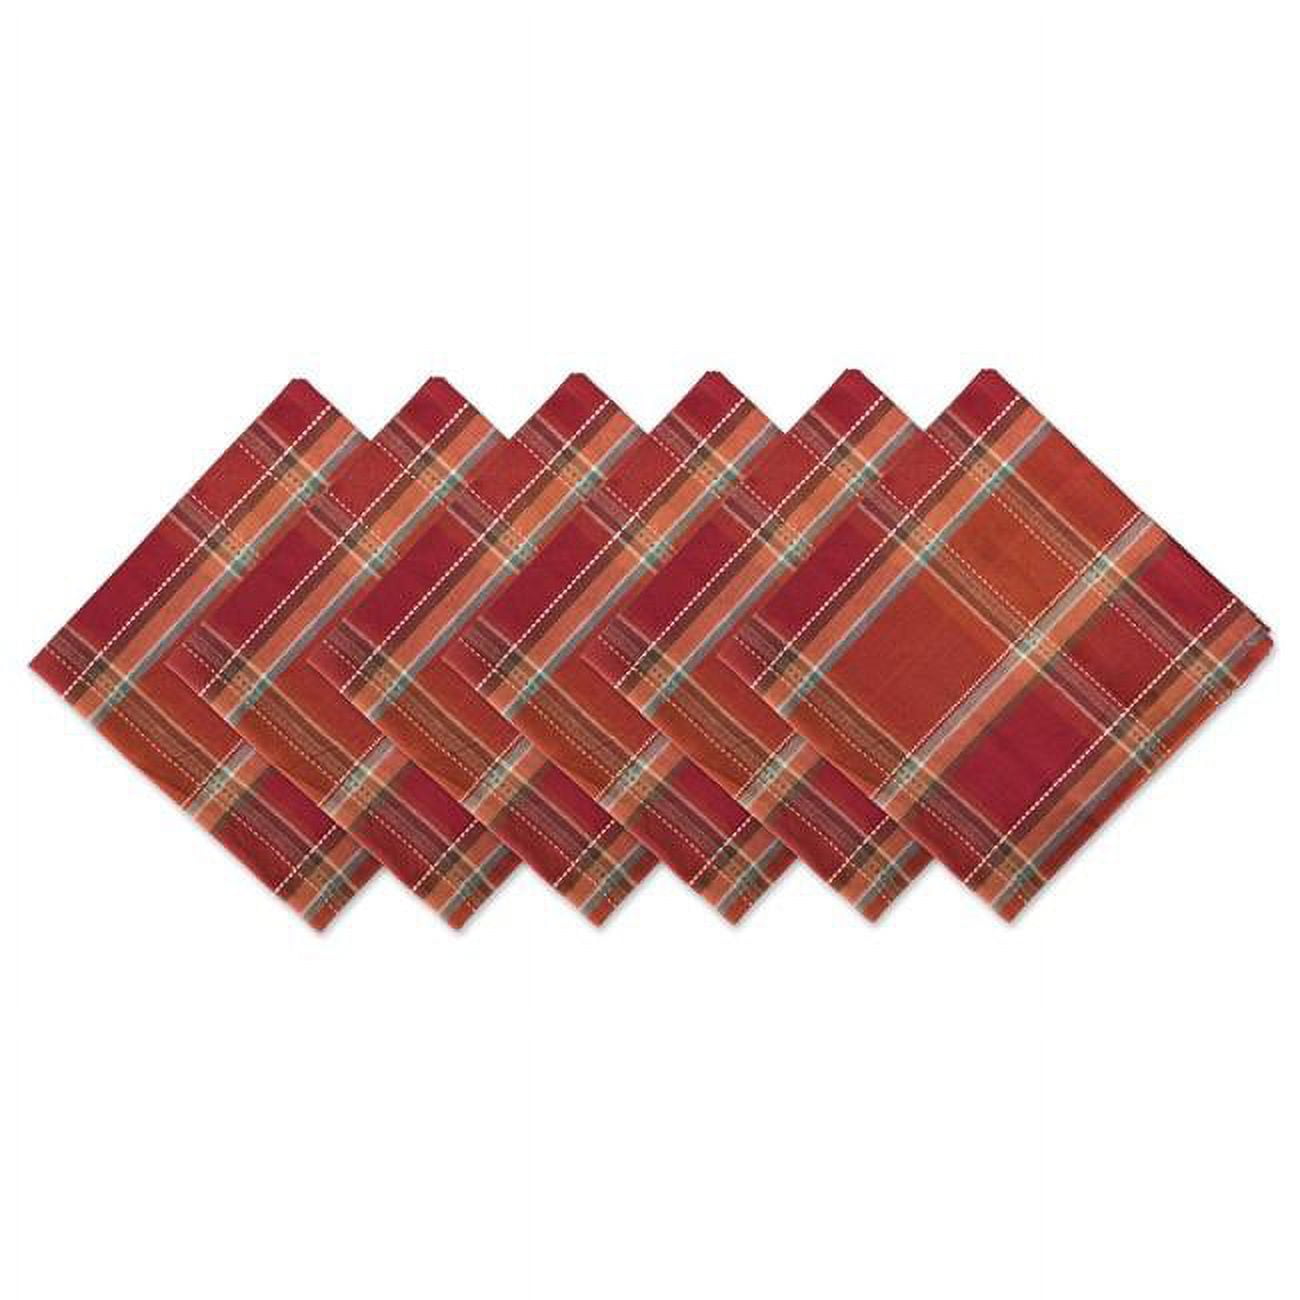 Give Thanks Plaid Napkin Set of 6 – DII Home Store